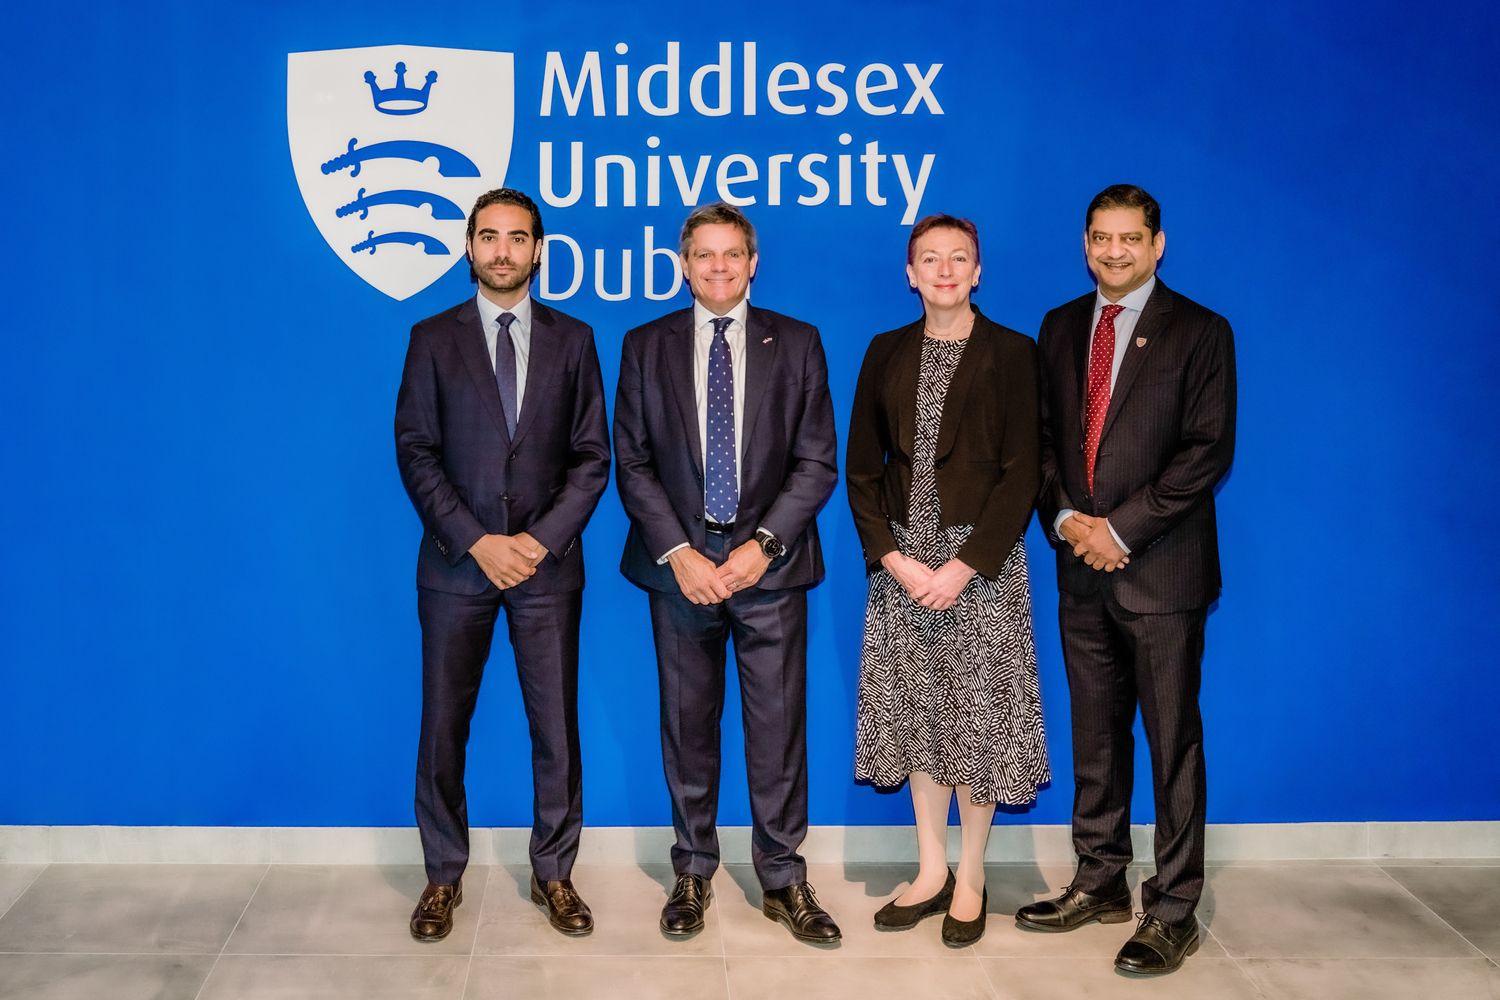 On Wednesday 16 November 2022, Middlesex University (MDX) Dubai inaugurated its new campus expansion in Dubai Knowledge Park (DKP), a member of TECOM Group PJSC, in the presence of a delegation of officials from the UAE and UK.